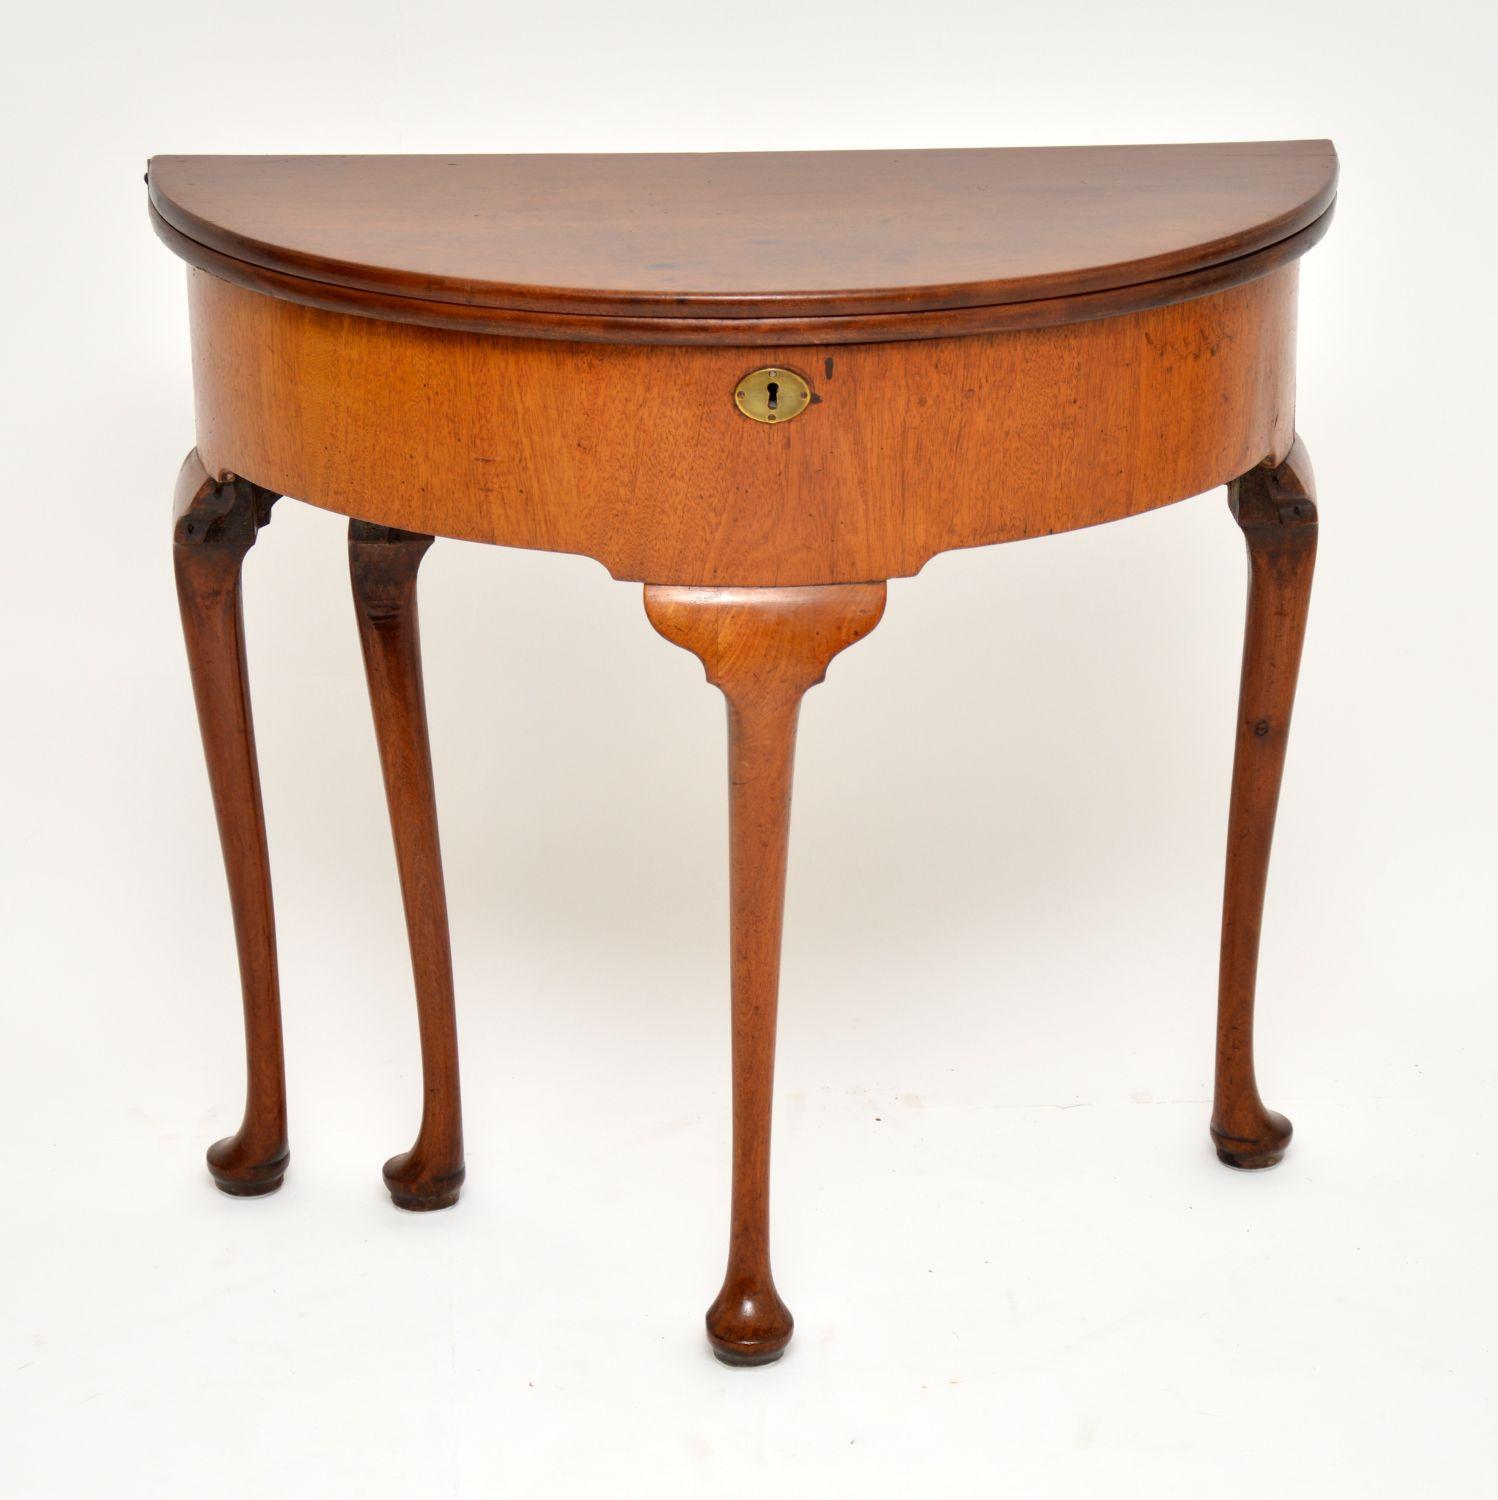 Antique George II tea table dating from around the 1750’s & in very good original condition & with a wonderful colour.

Originally, these tables were generally put out of the way & brought out to serve tea on, hence the name.

This table has nice